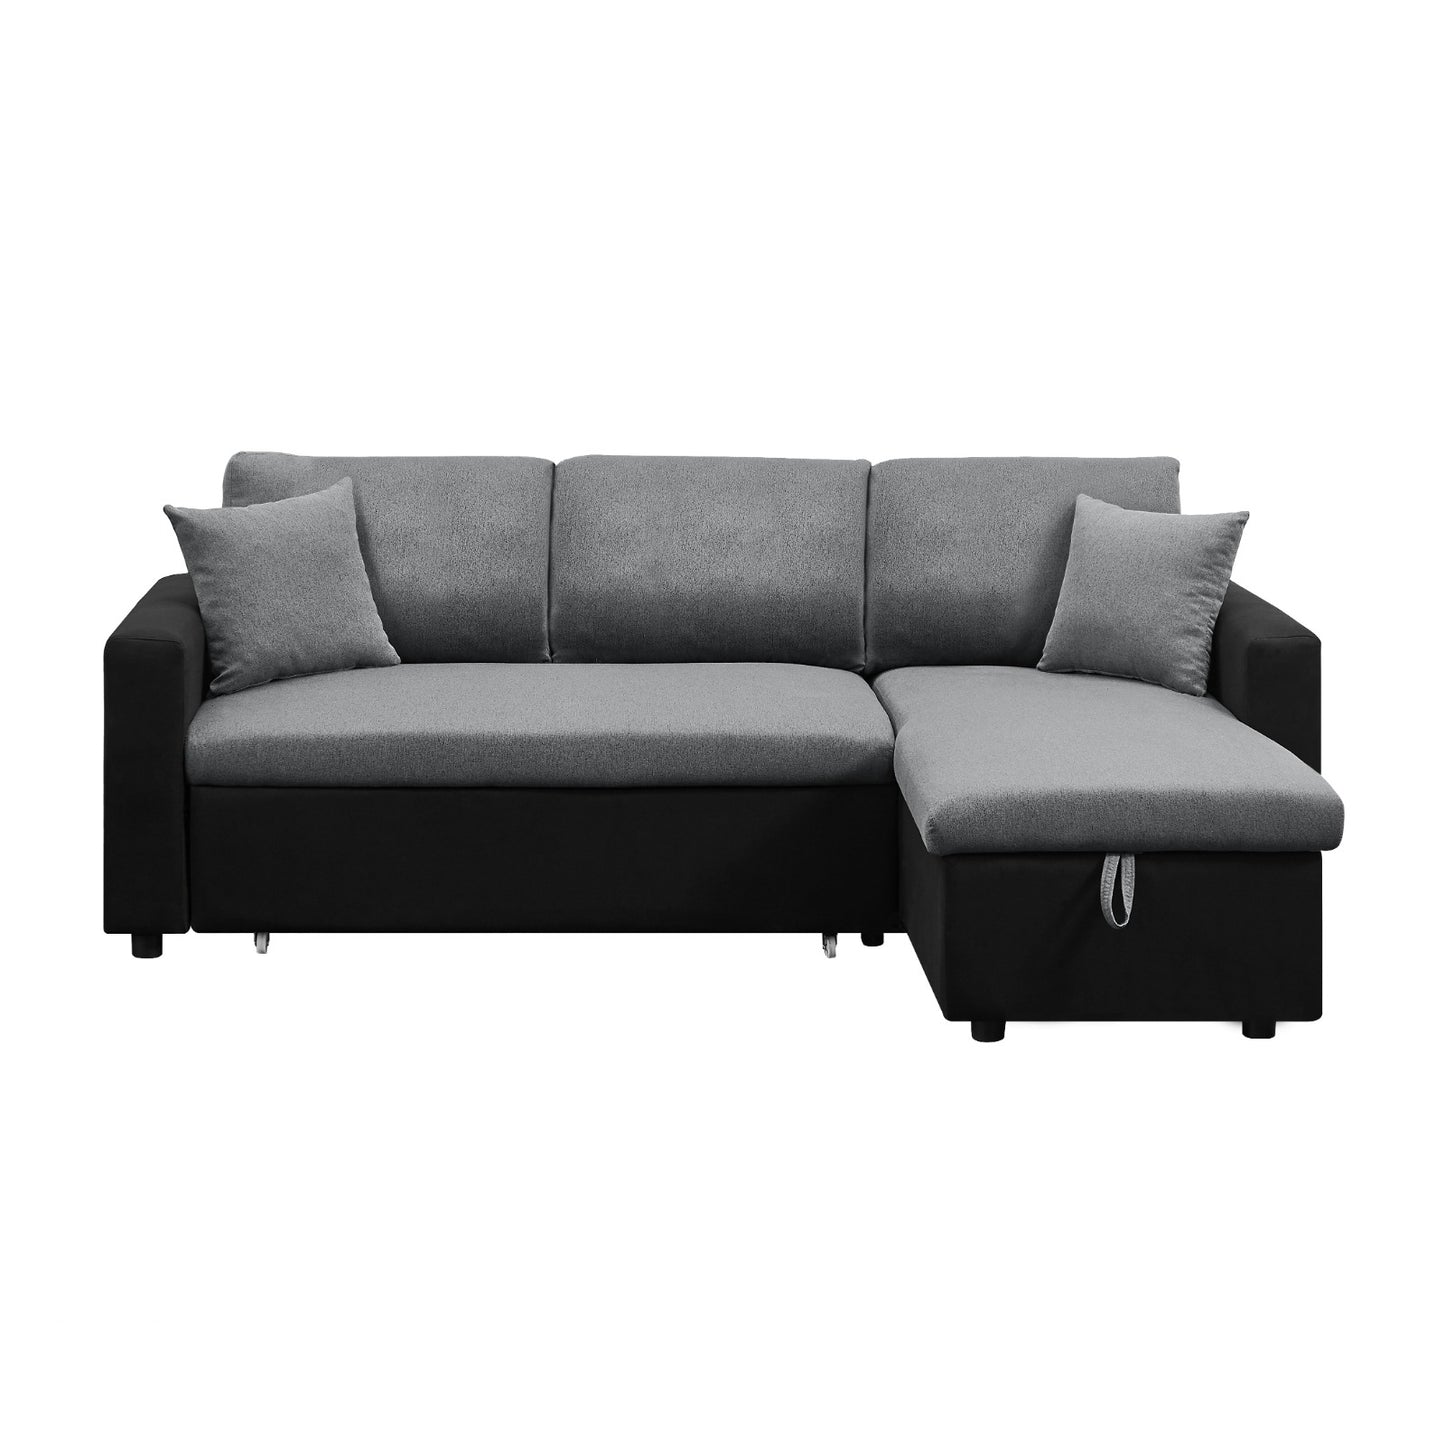 (1642 TWO TONE GREY/ BLACK)- REVERSIBLE- FABRIC SECTIONAL SOFA WITH PULL OUT BED